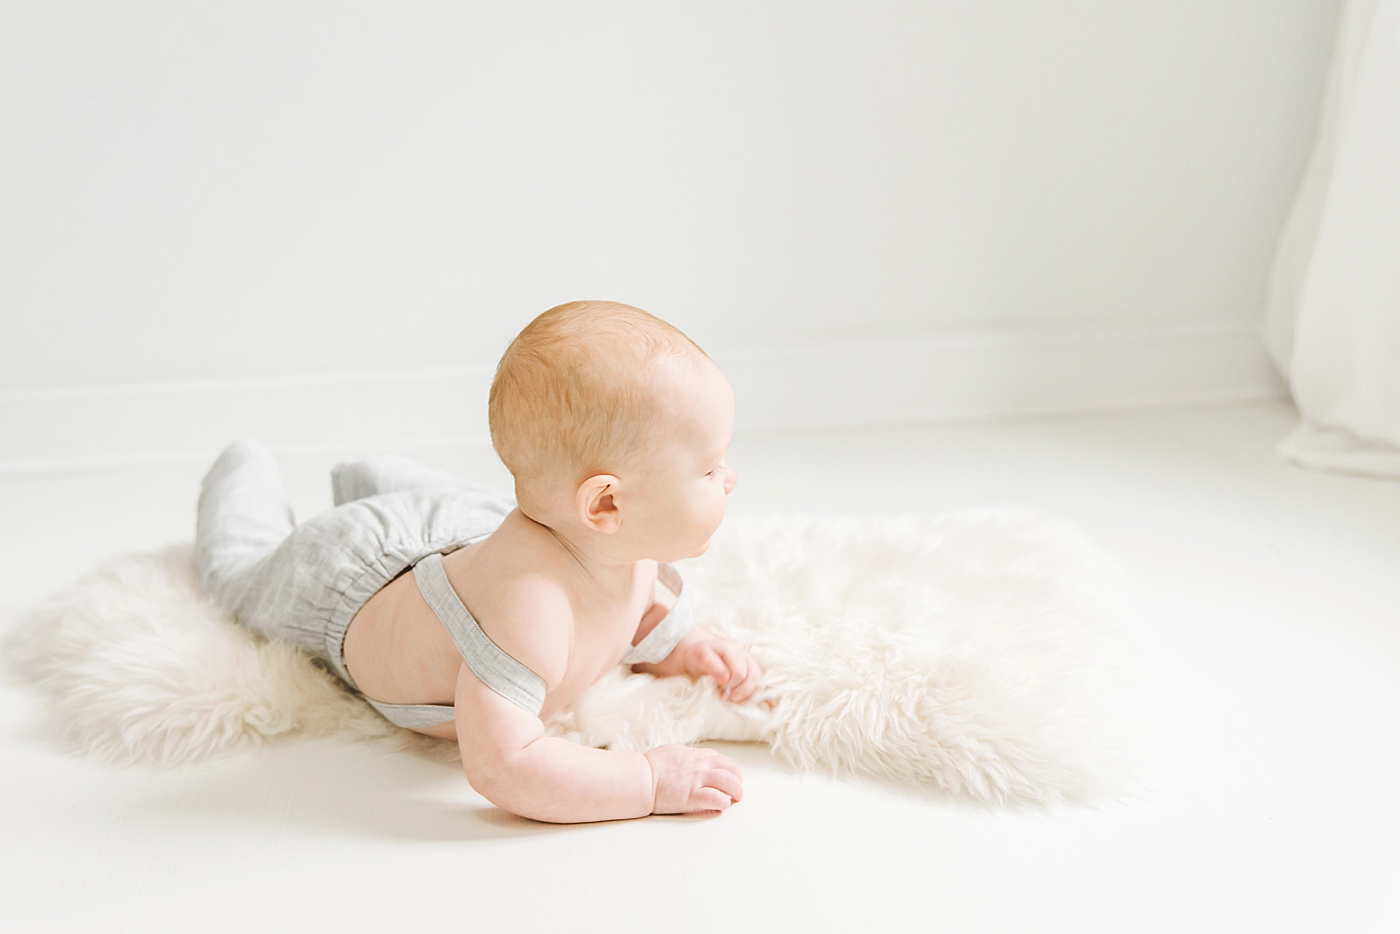 Babt boy in overalls laying on a fuzzy rug | Photo by Anna Wisjo Photography 